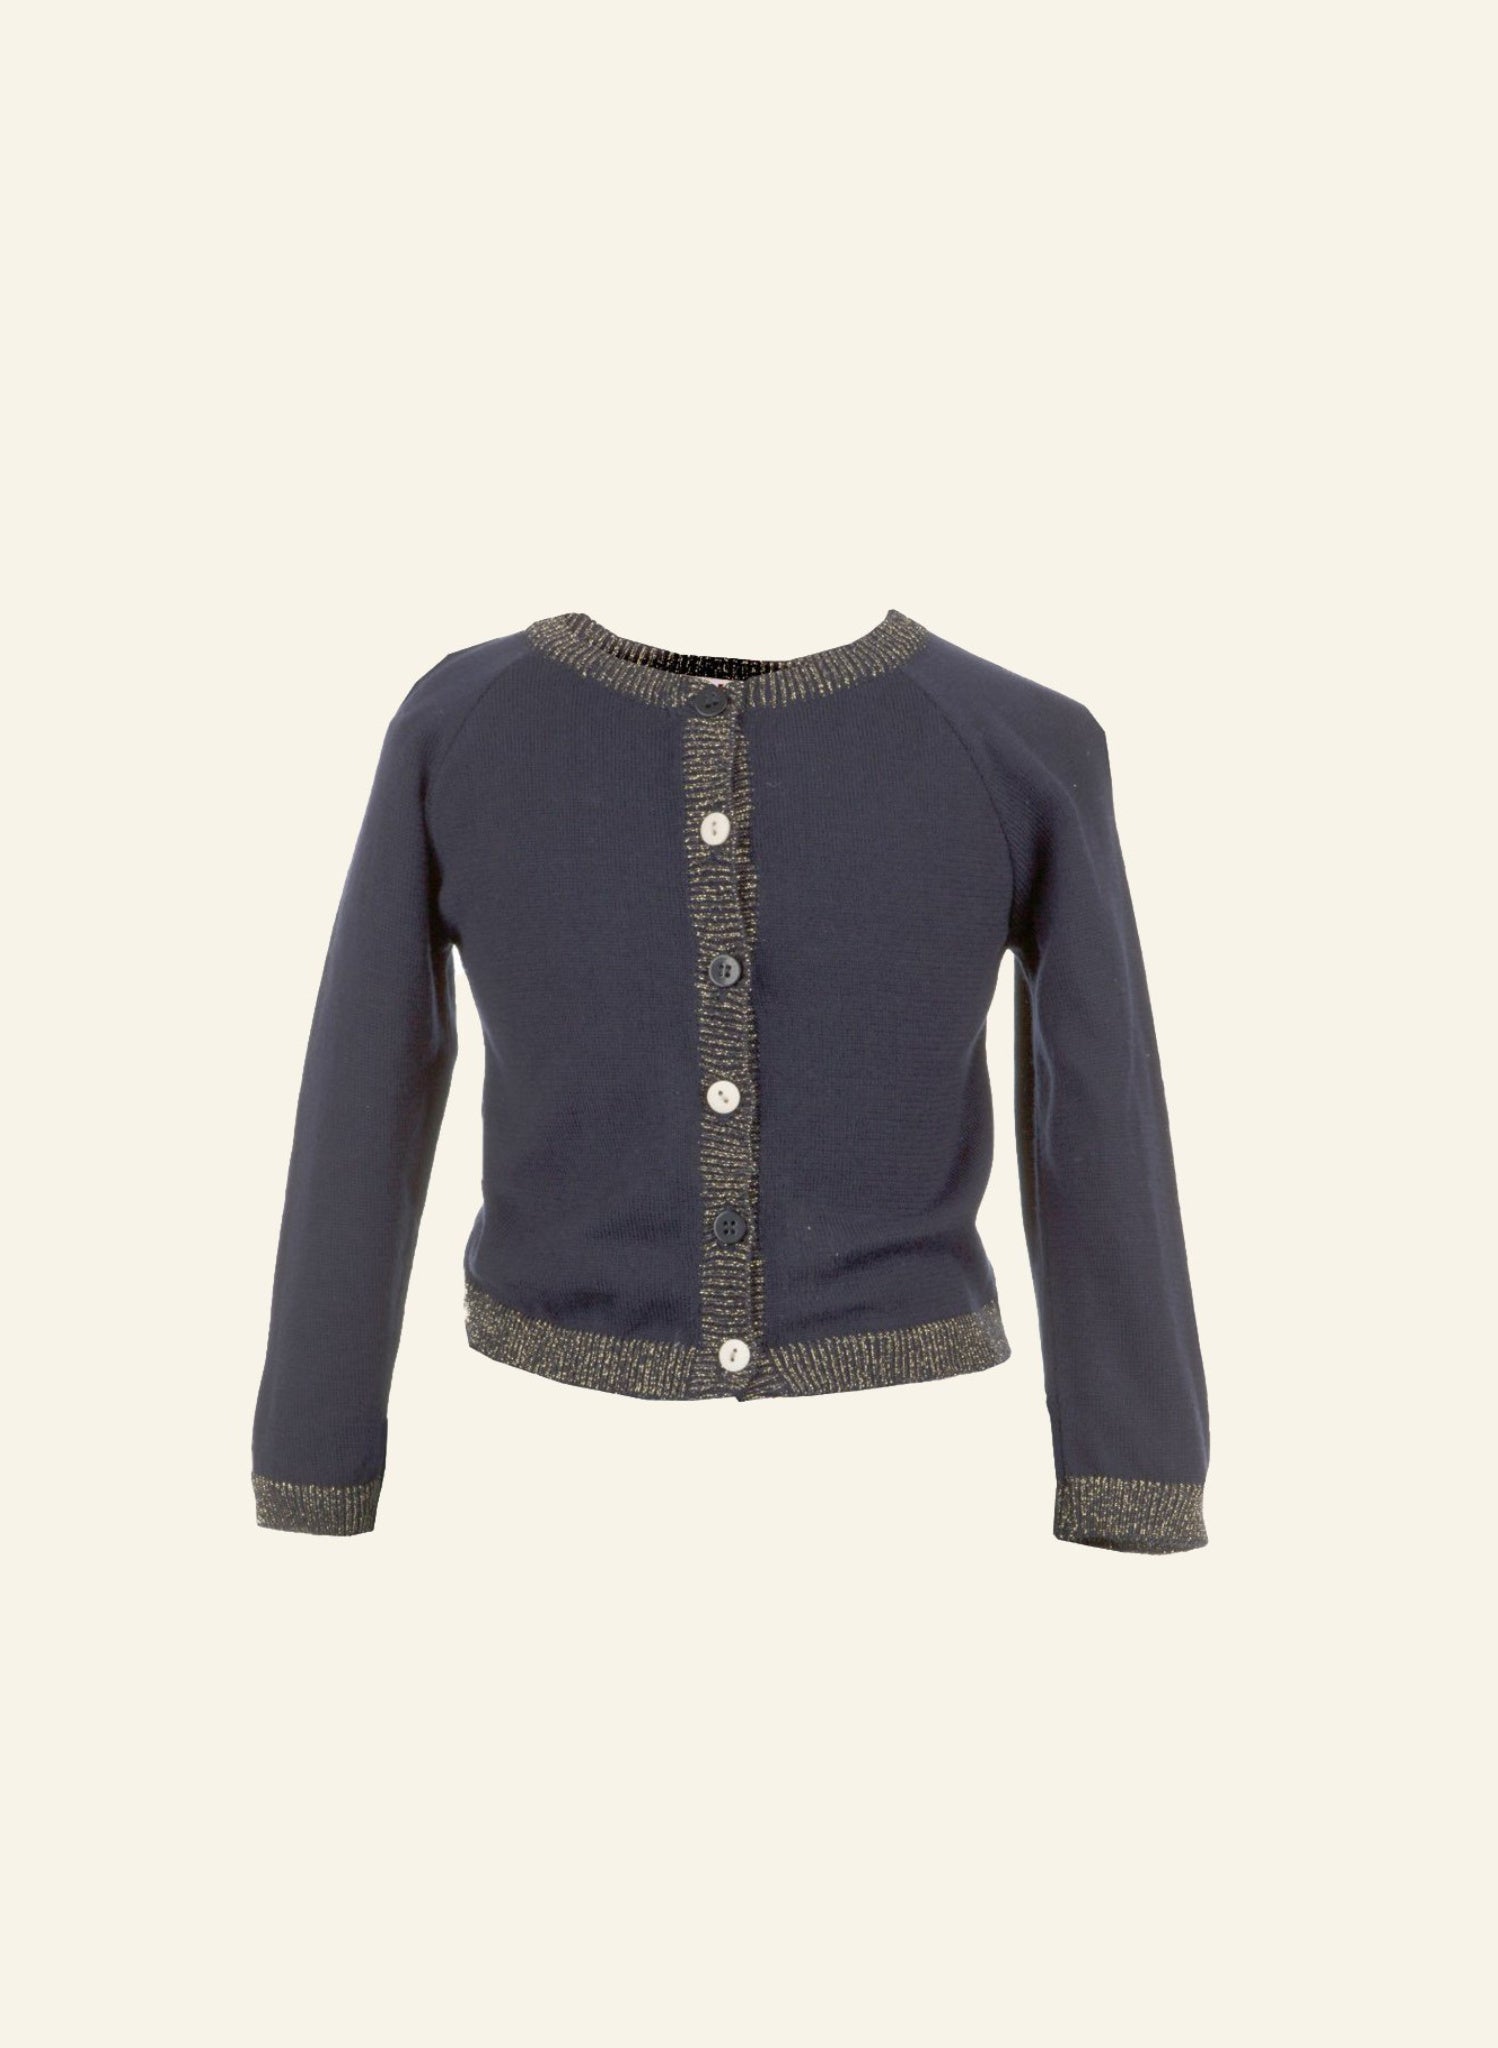 Children's Classic Party Cardigan in Sparkly Navy | Palava